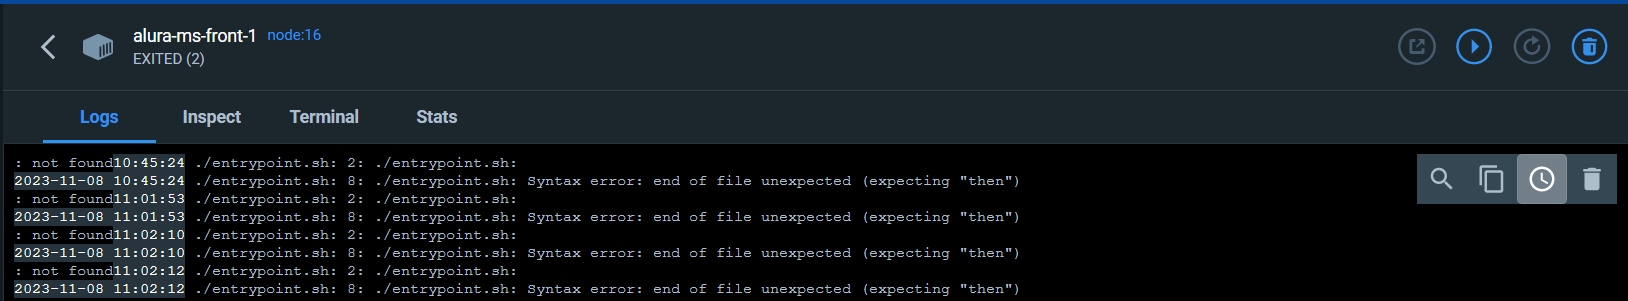 docker-desktop-logs-entrypoint.sh:2: ./entrypoint.sh: Sintax error: end of file unexpected expecting "then"